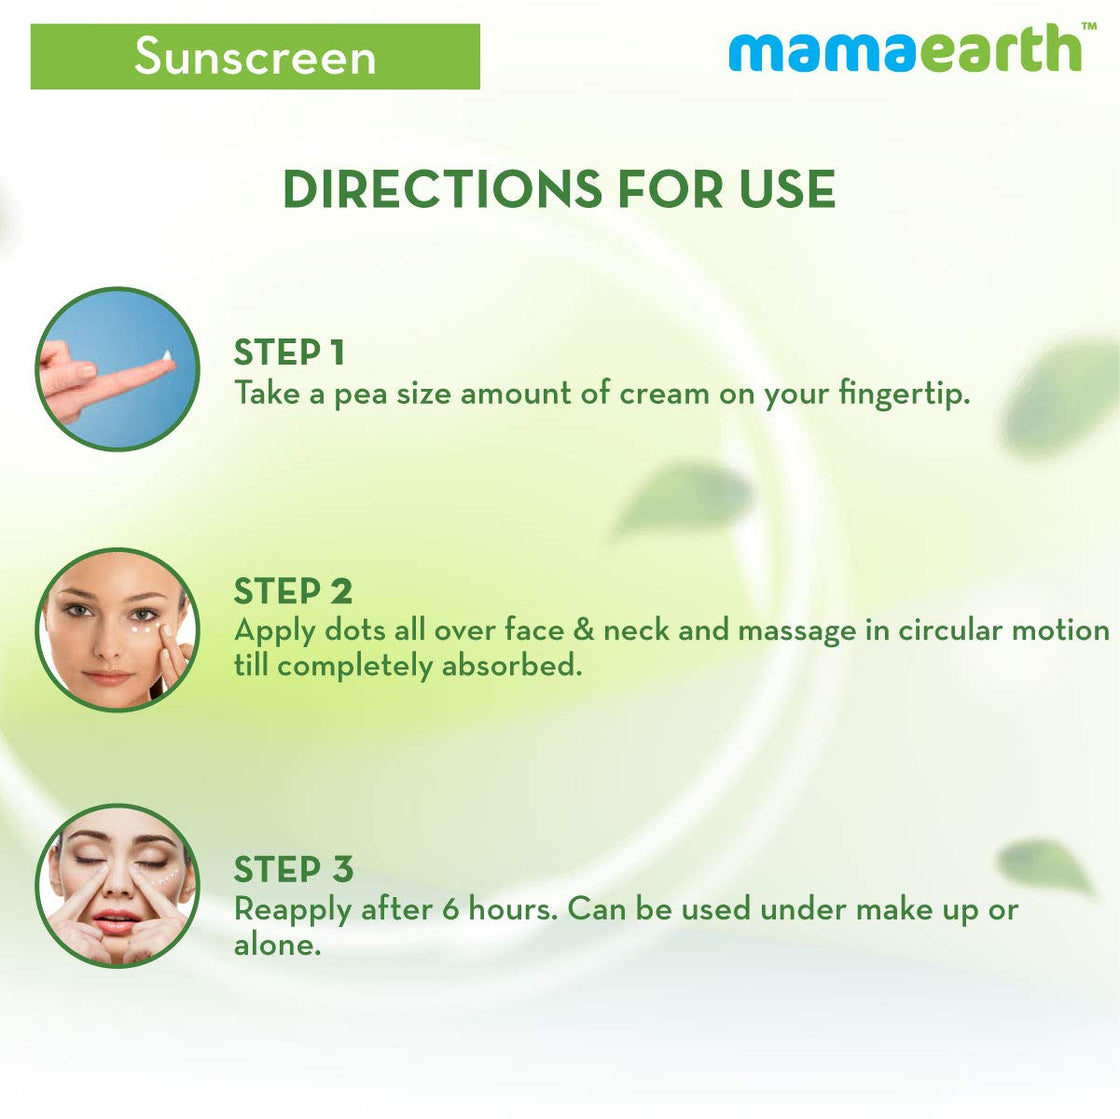 Mamaearth Ultra Light Indian Sunscreen Spf50 Pa+++ With Turmeric & Carrot Seed-7